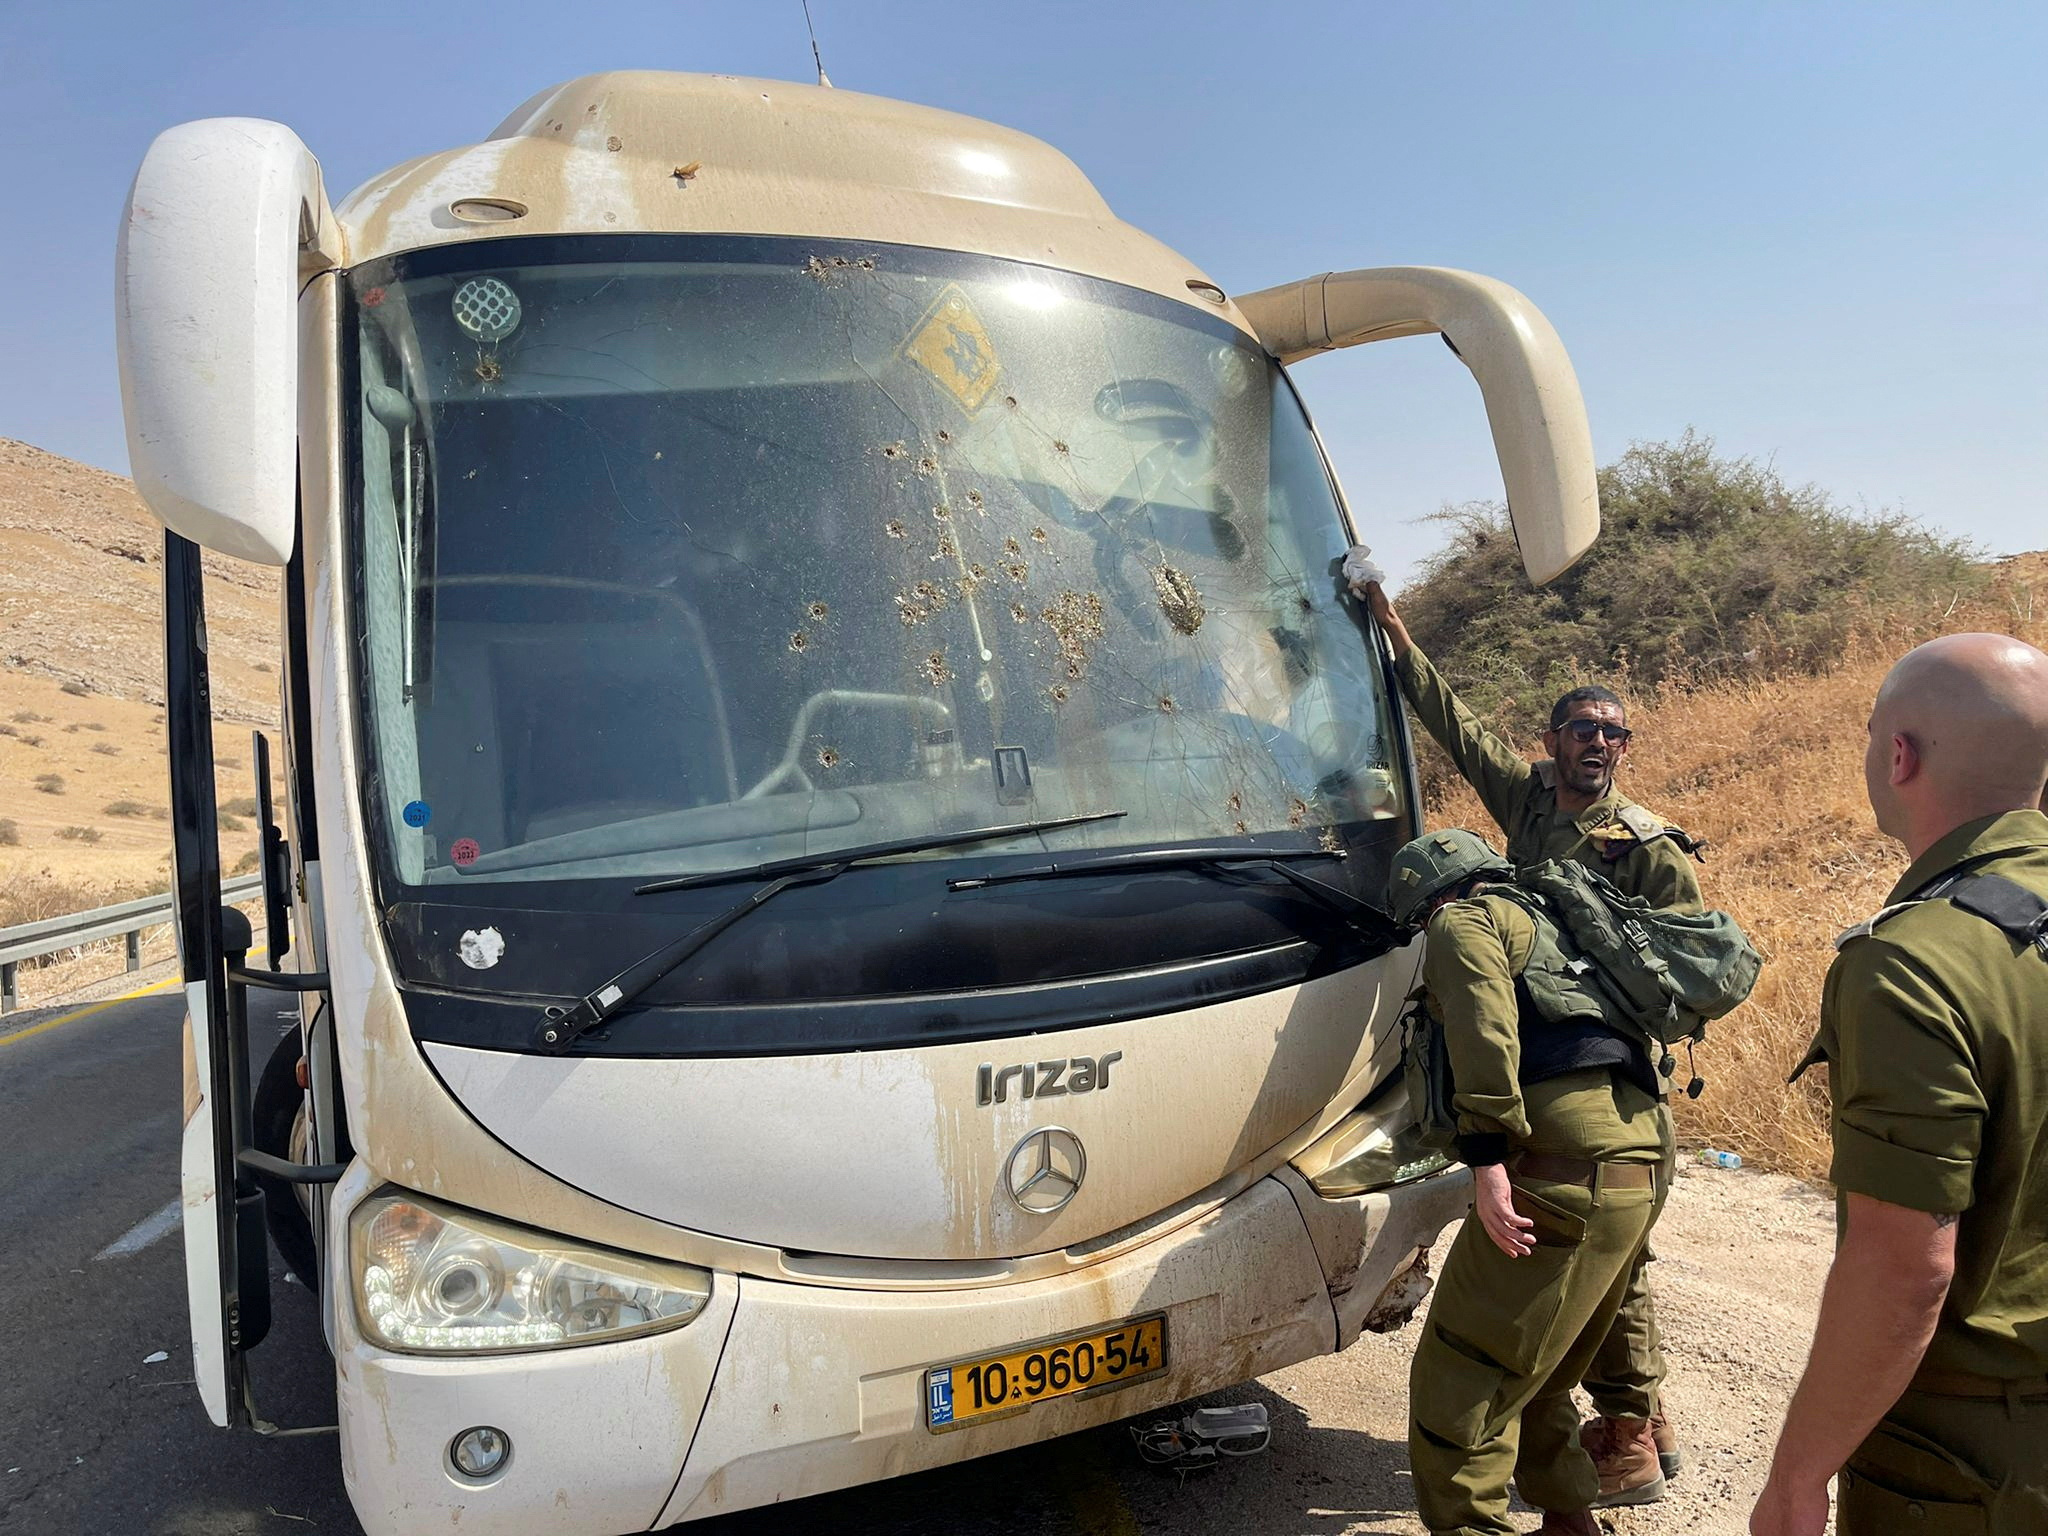 Palestinians fire on bus with Israeli troops in West Bank, 6 hurt | Reuters